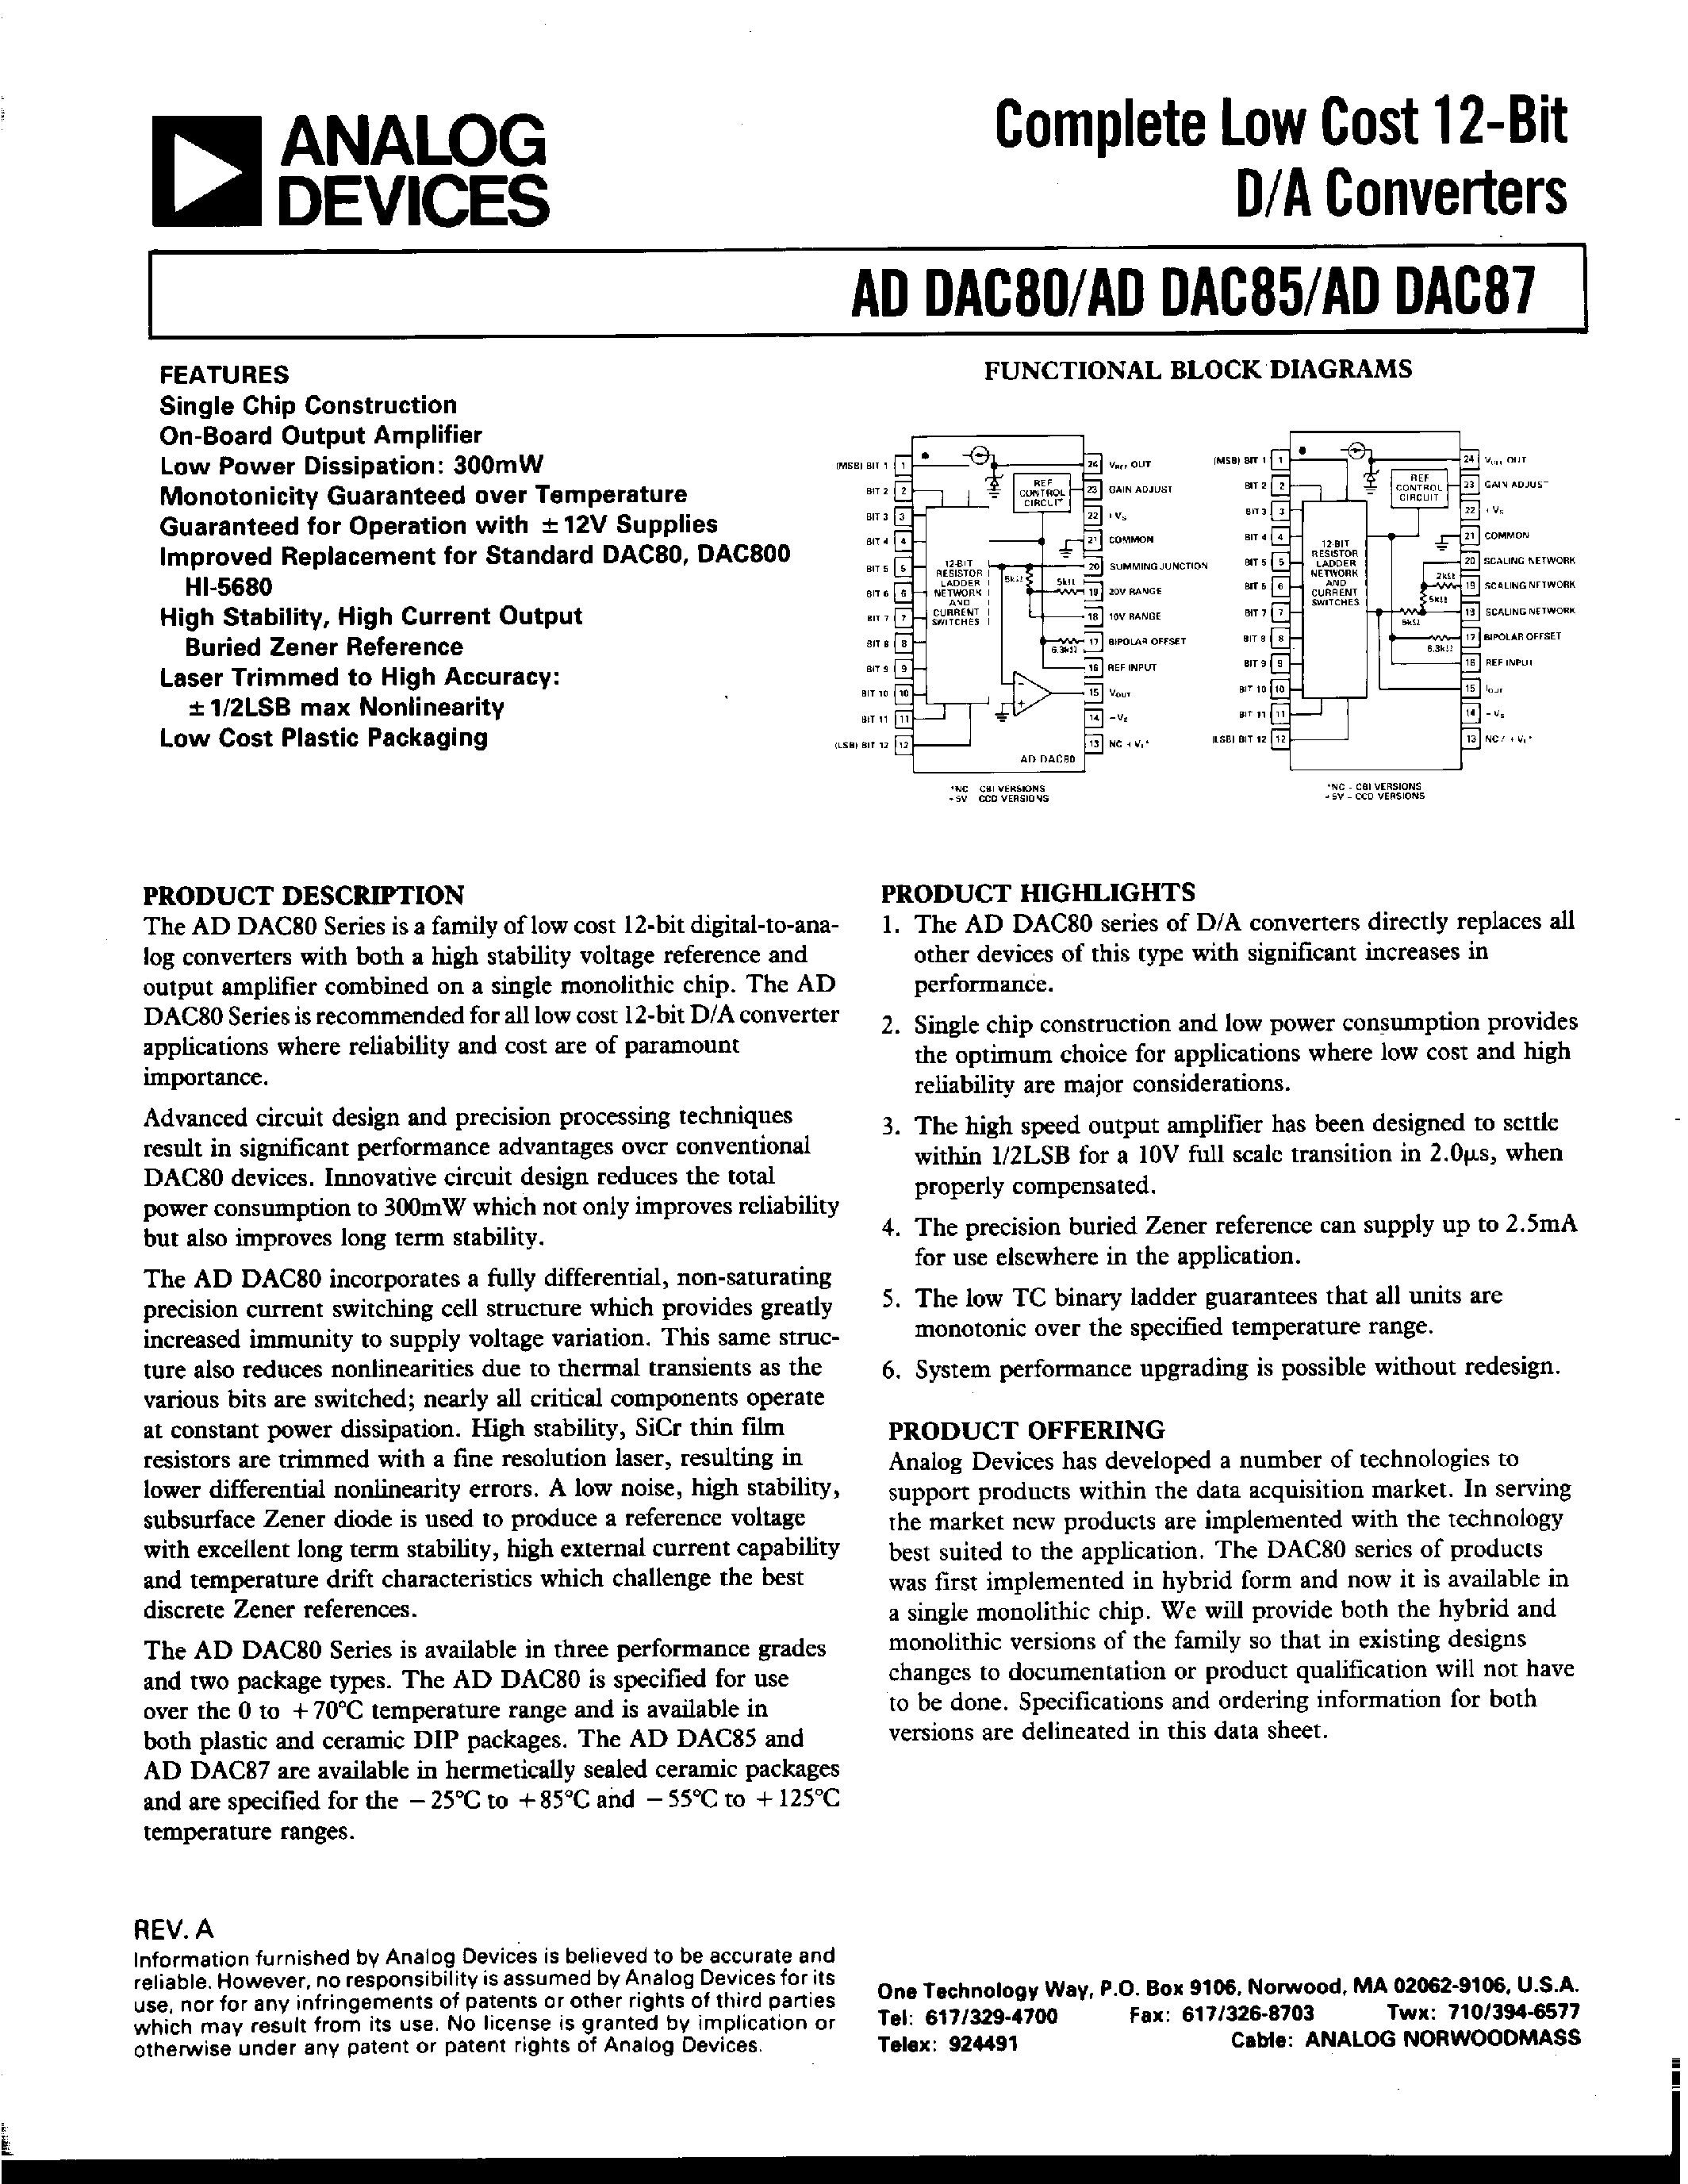 Datasheet ADDAC85C-CCD-V - COMPLETE LOW COST 12-BIT D/A CONVERTERS page 1